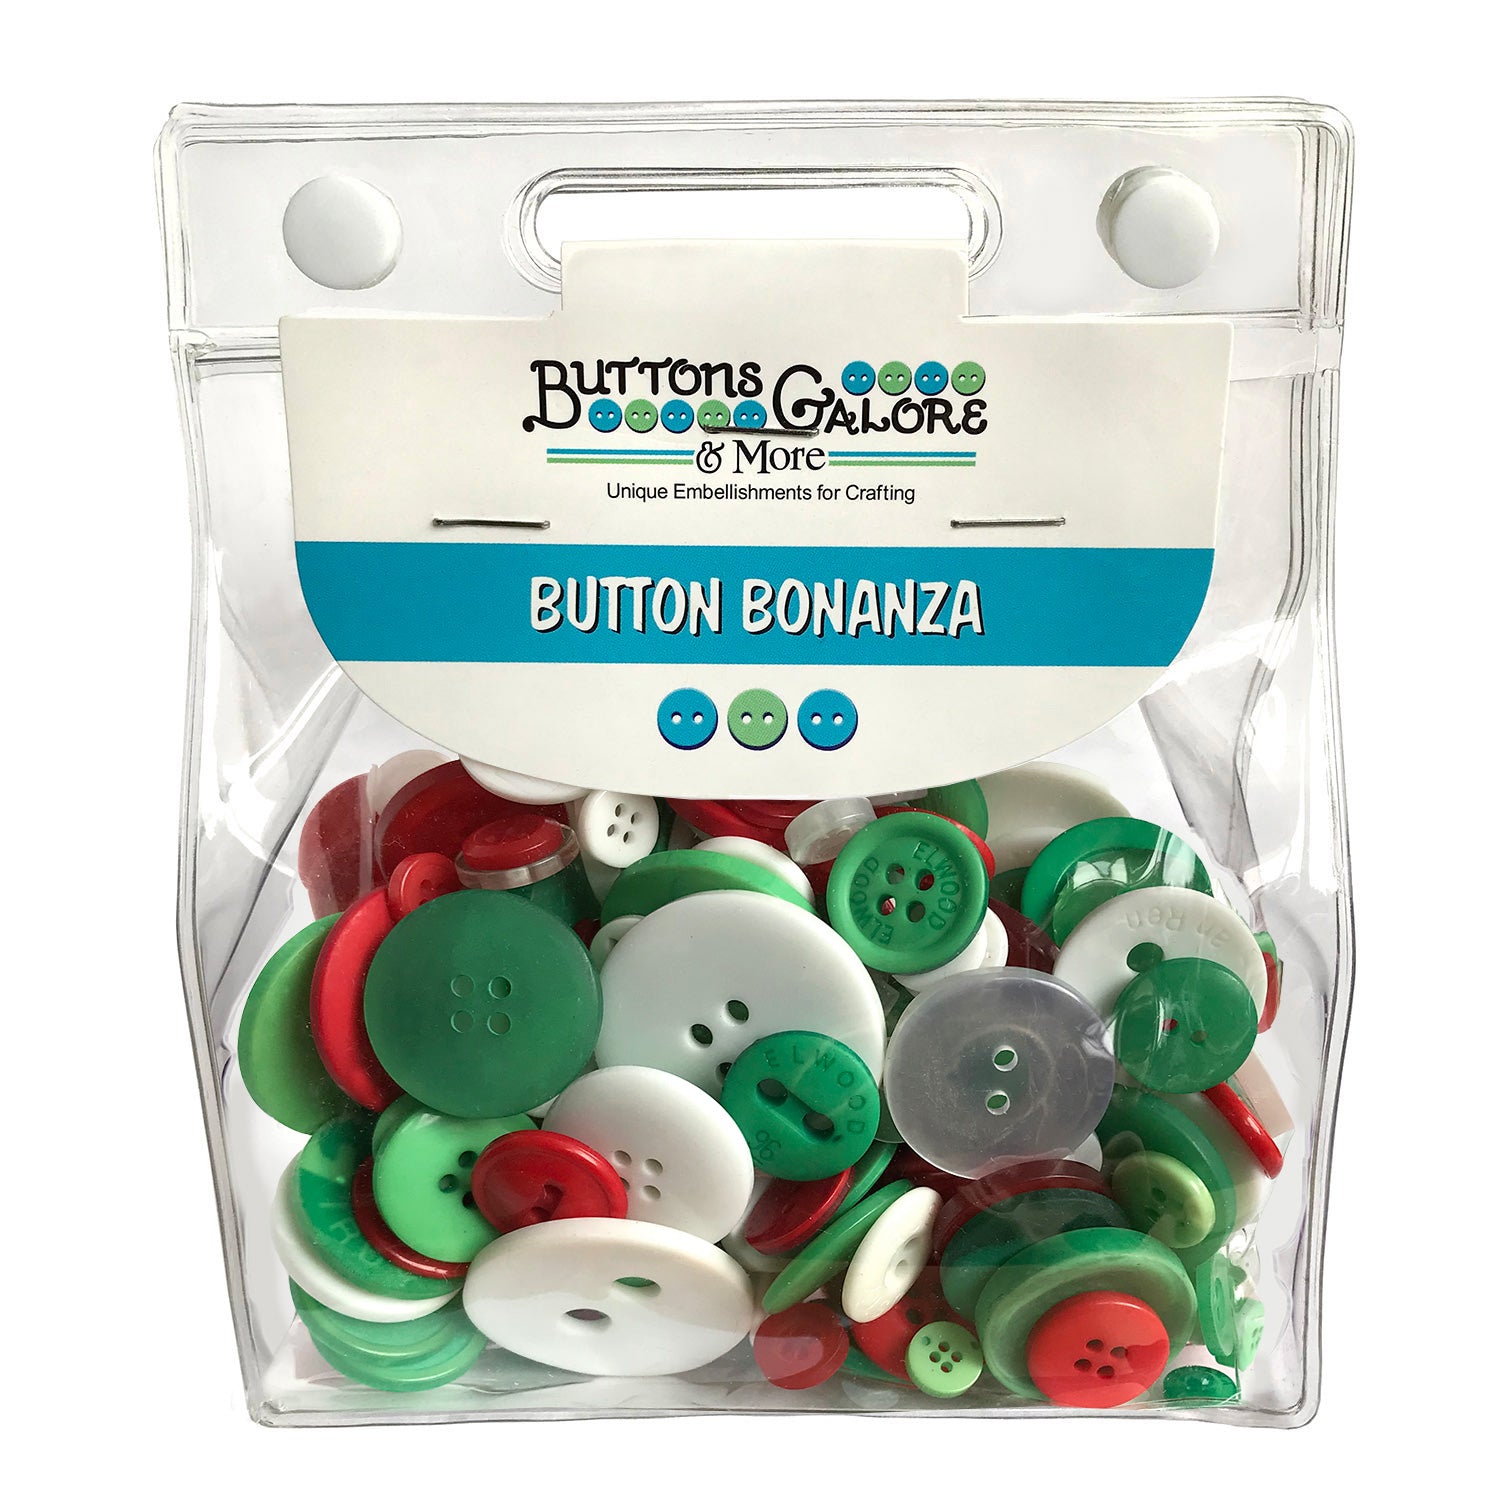 Buttons Galore Bulk Bright Colorful Buttons in Jumbo Cookie Jar for Crafts-  Festive Buttons